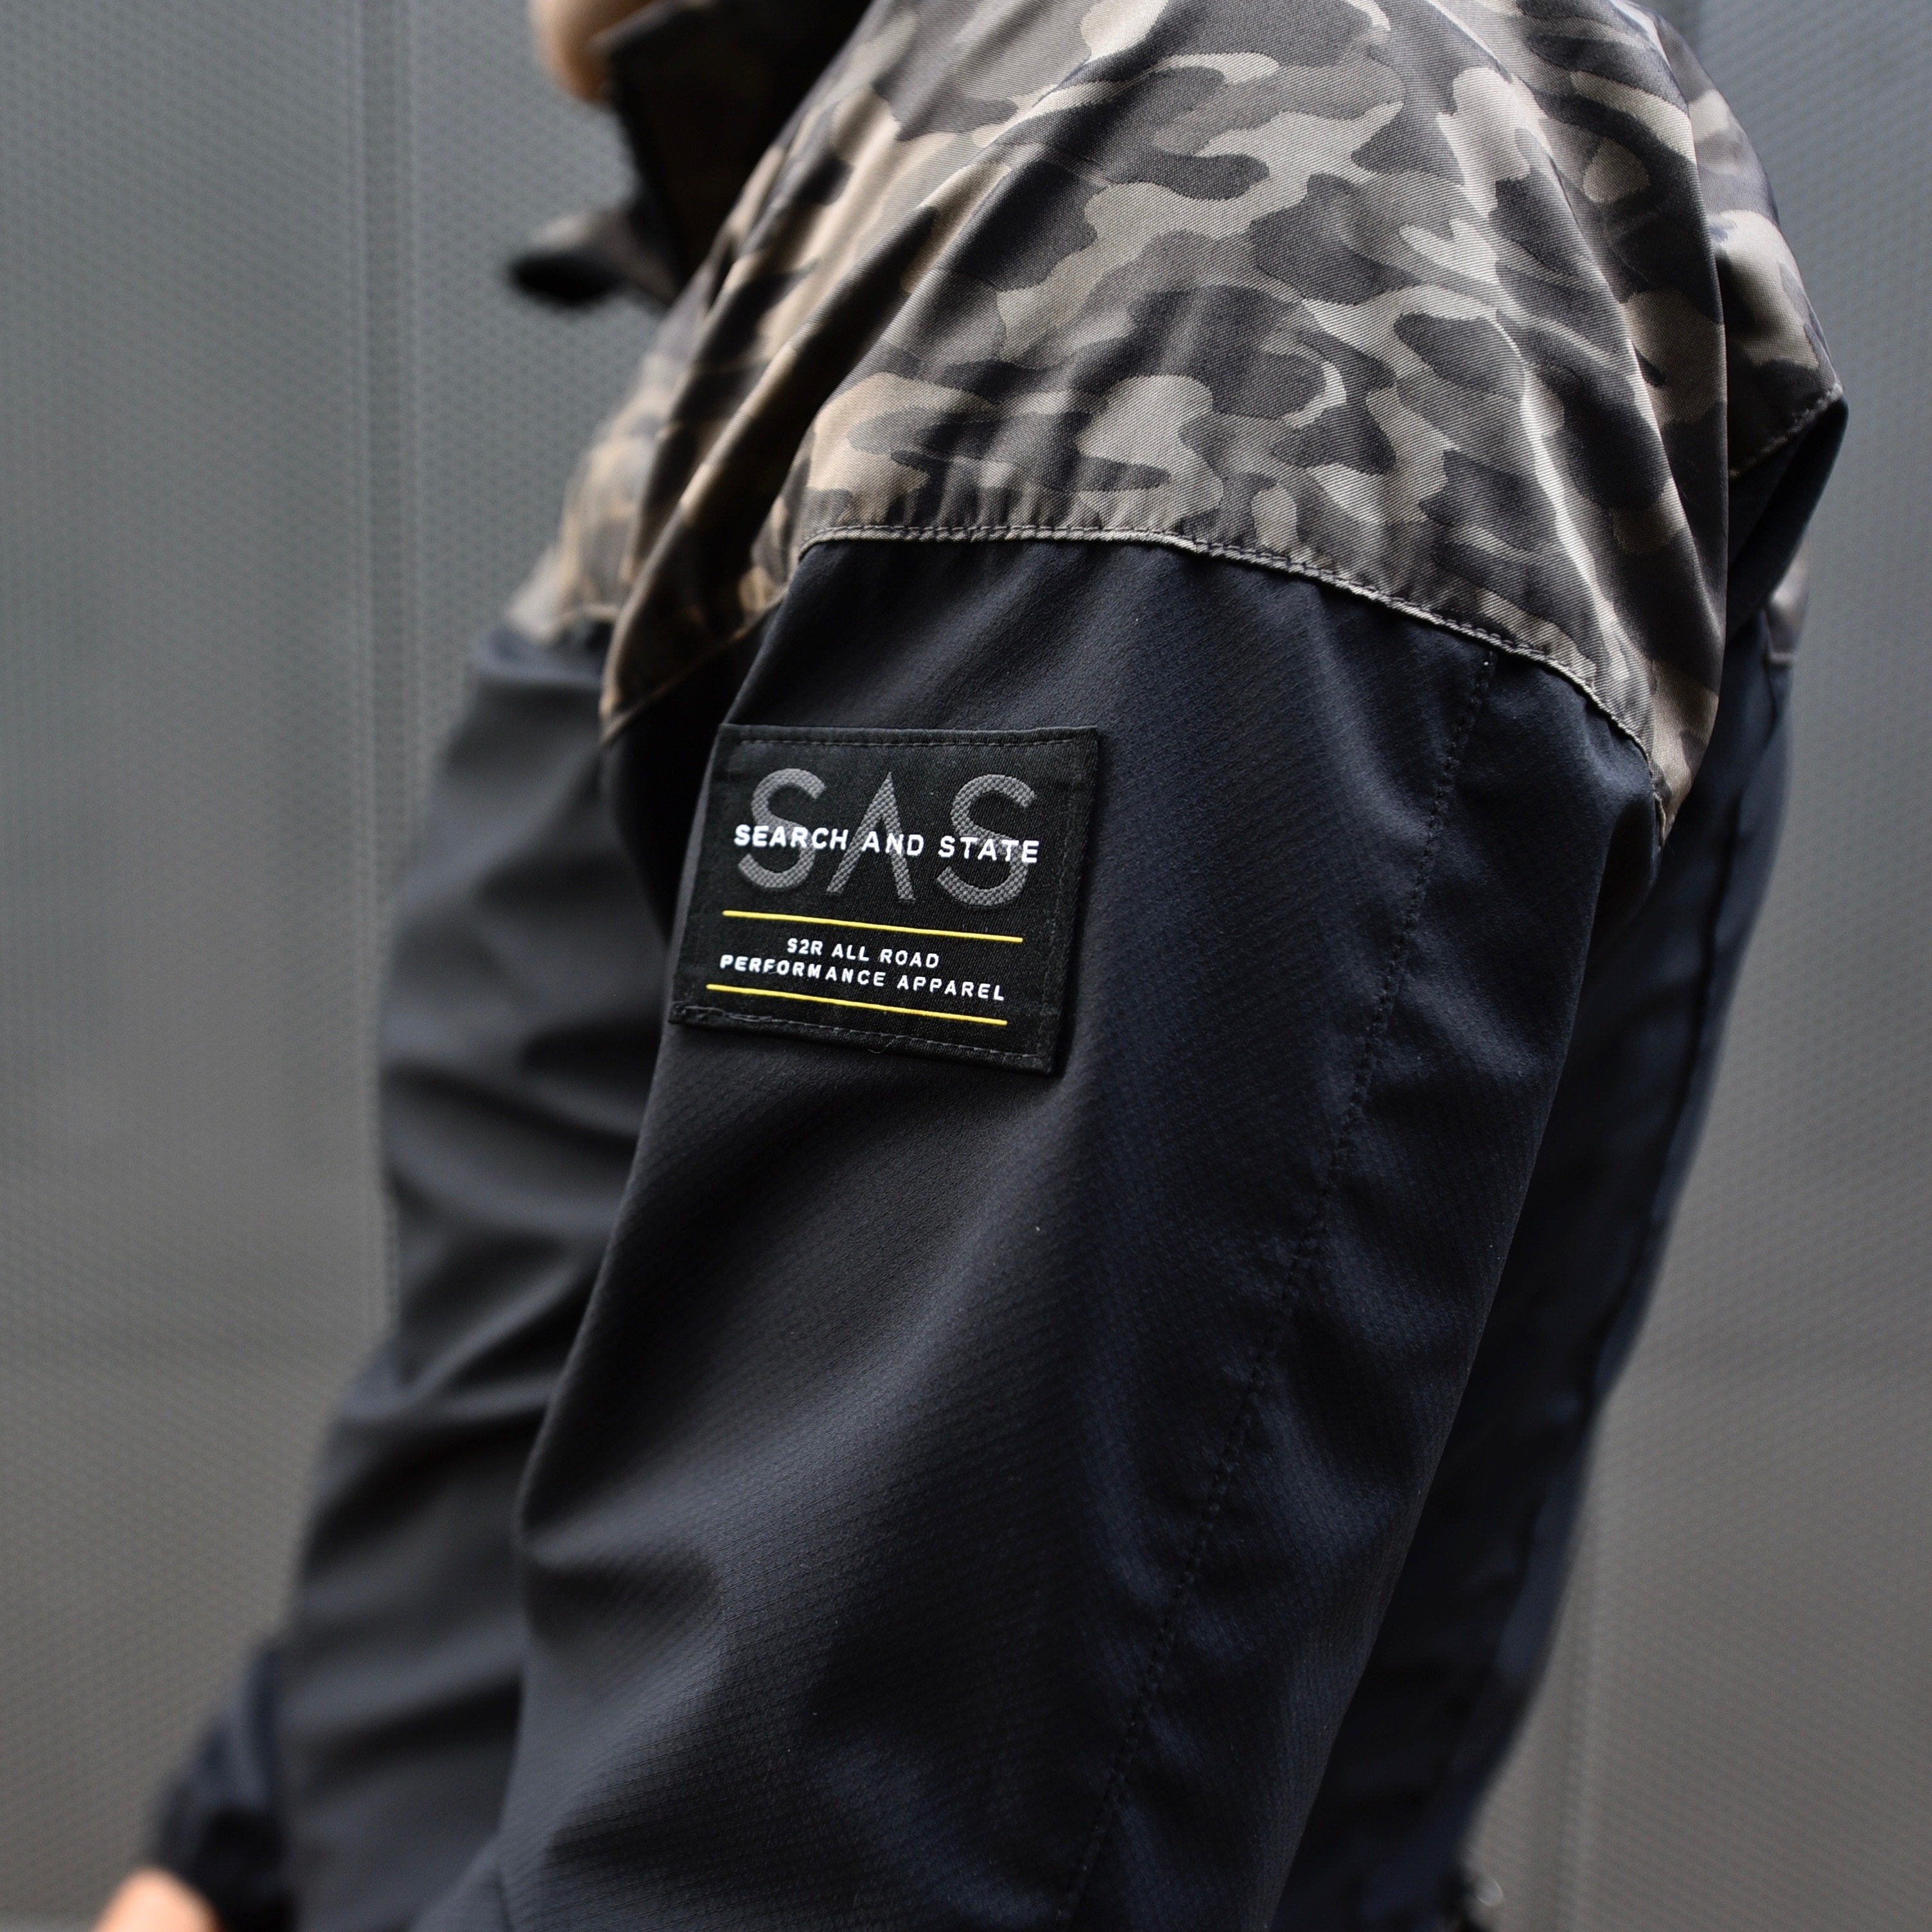 SEARCH AND STATE S1-J Camo Colorblock Riding Jacket